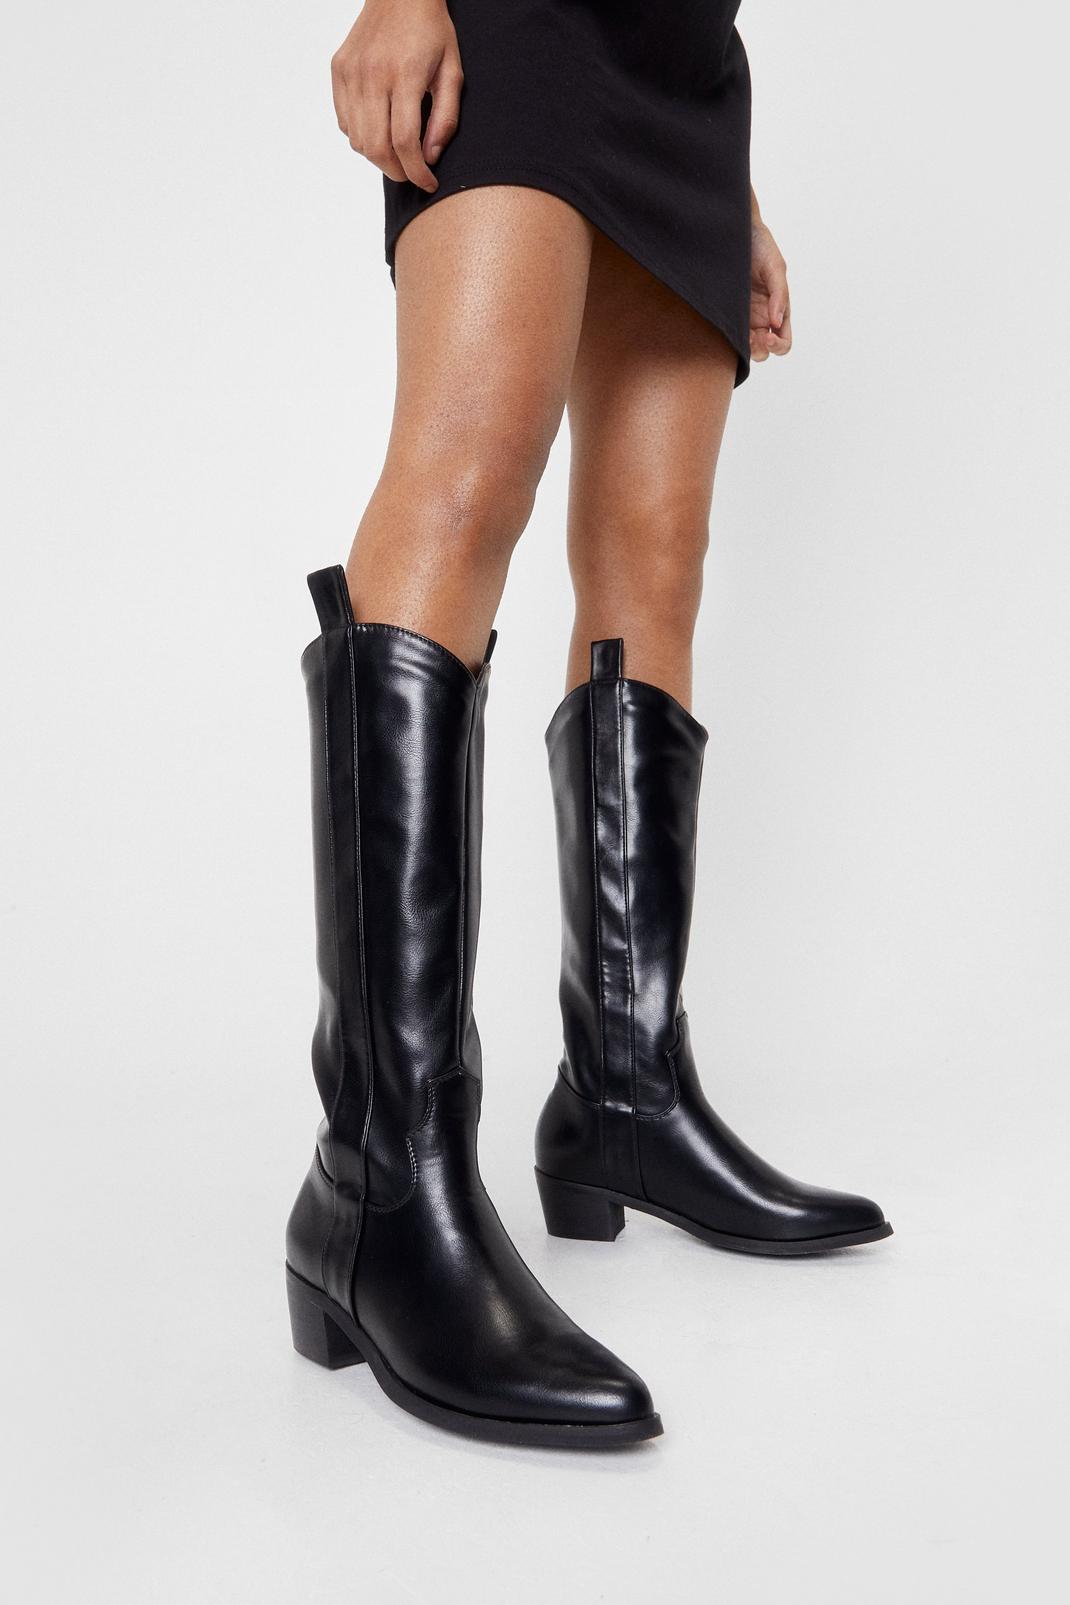 Black Faux Leather Western Knee High Boots image number 1